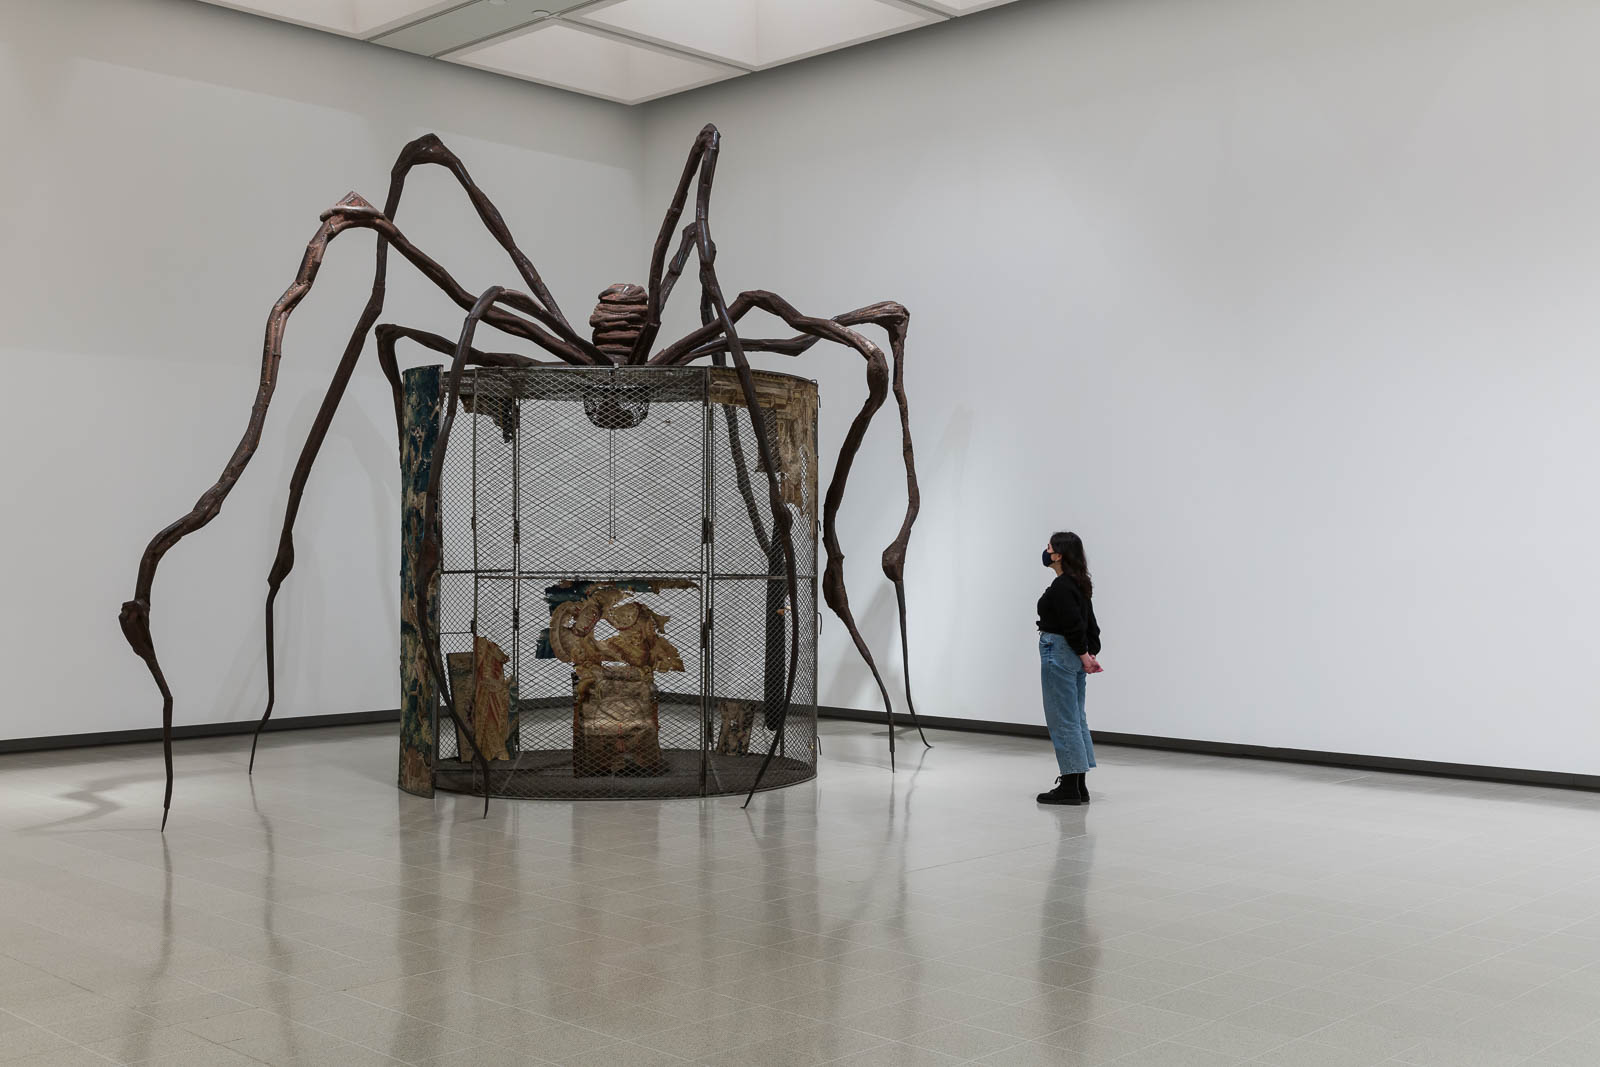 Untitled, 2004 by Louise Bourgeois